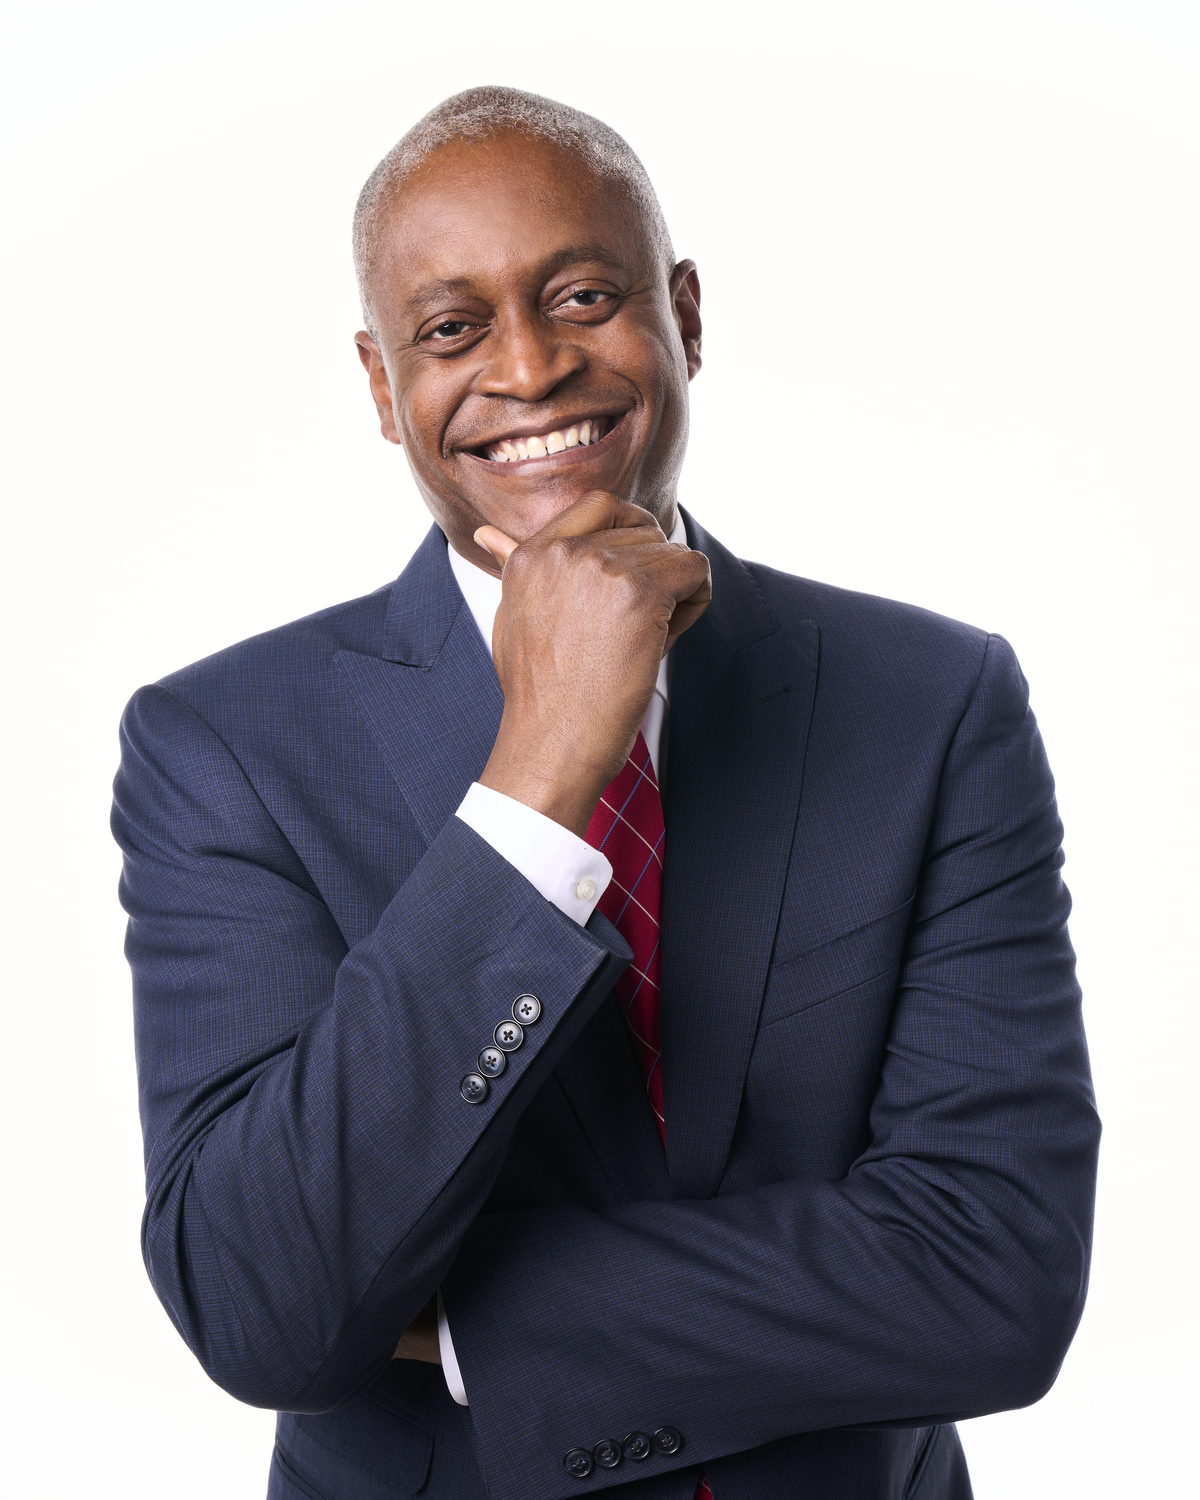 Raphael Bostic, President and Chief Executive Officer